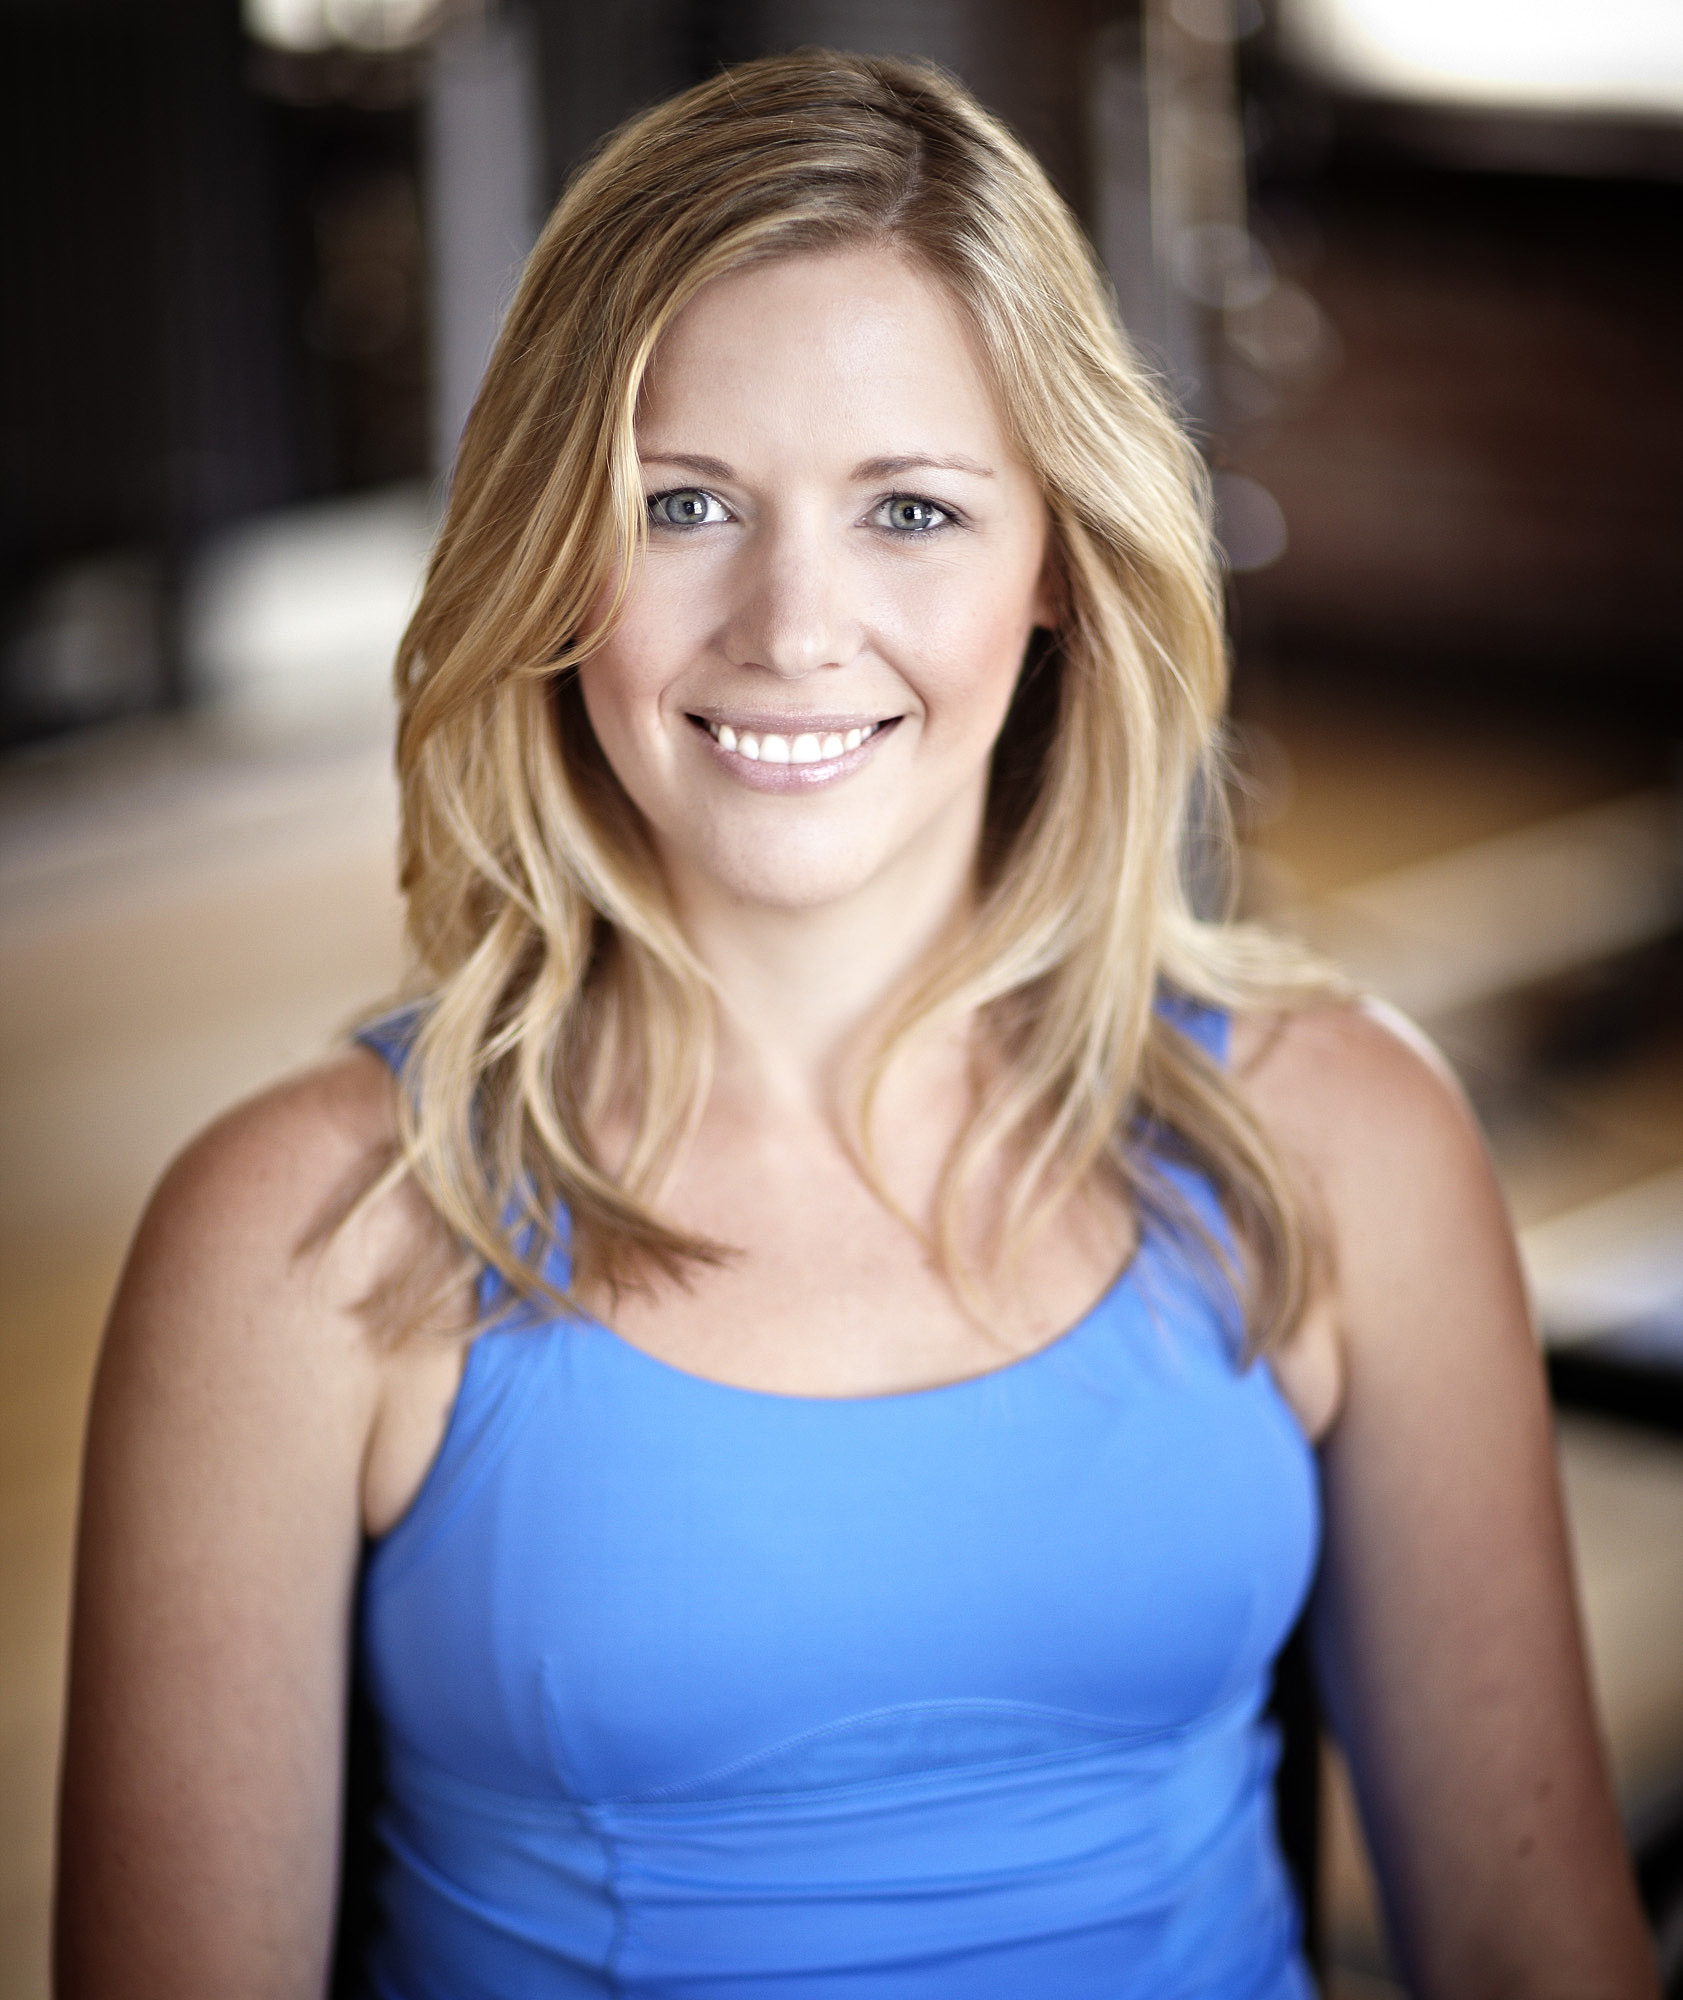 Firehaus Pilates' owner, Clare Harriman, will be hosting a Pilates Props Seminar on Saturday, May 10th to teach lessons on how to use small Pilates props at home.